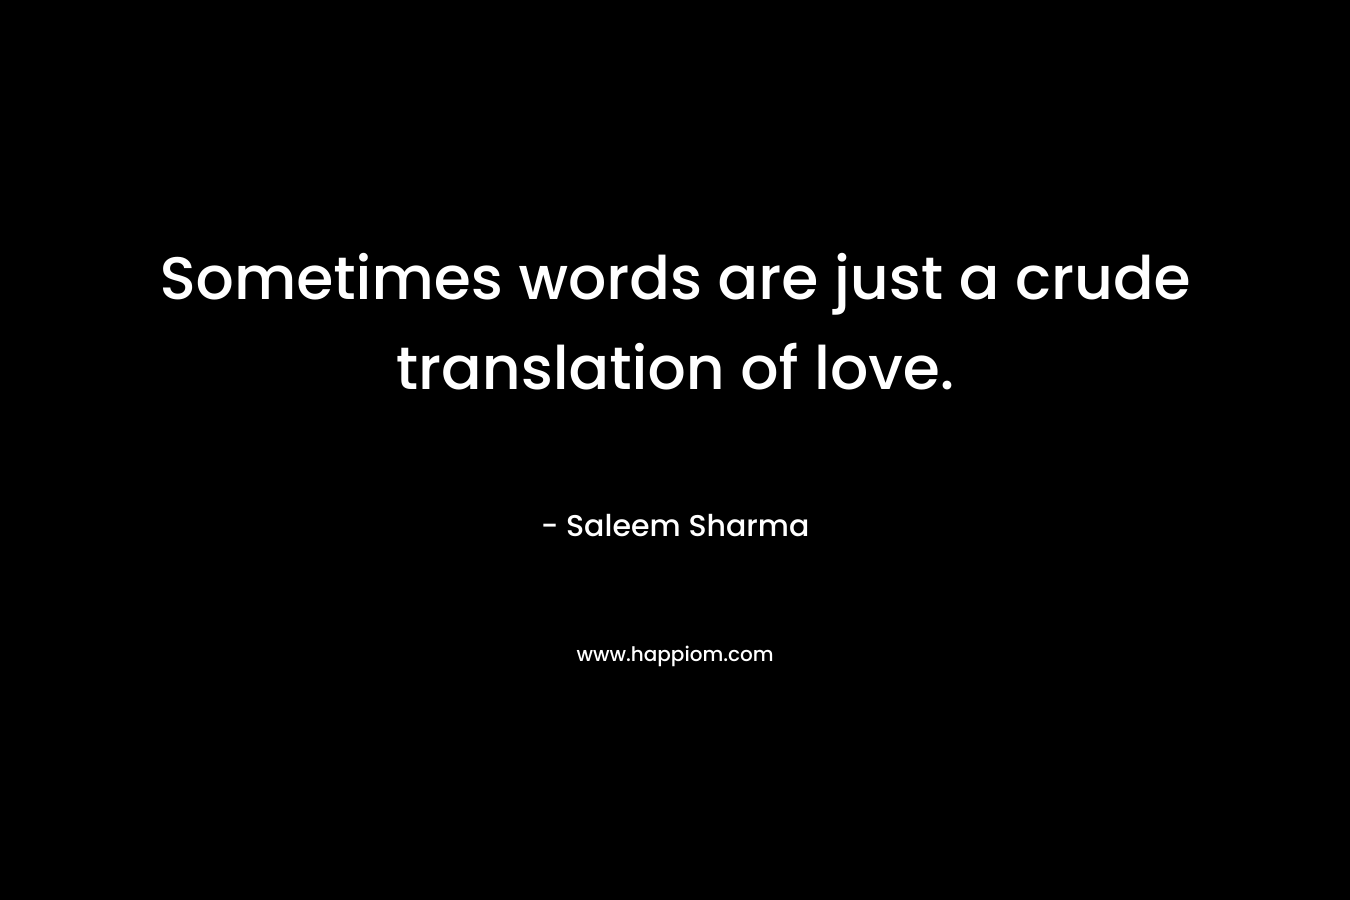 Sometimes words are just a crude translation of love.